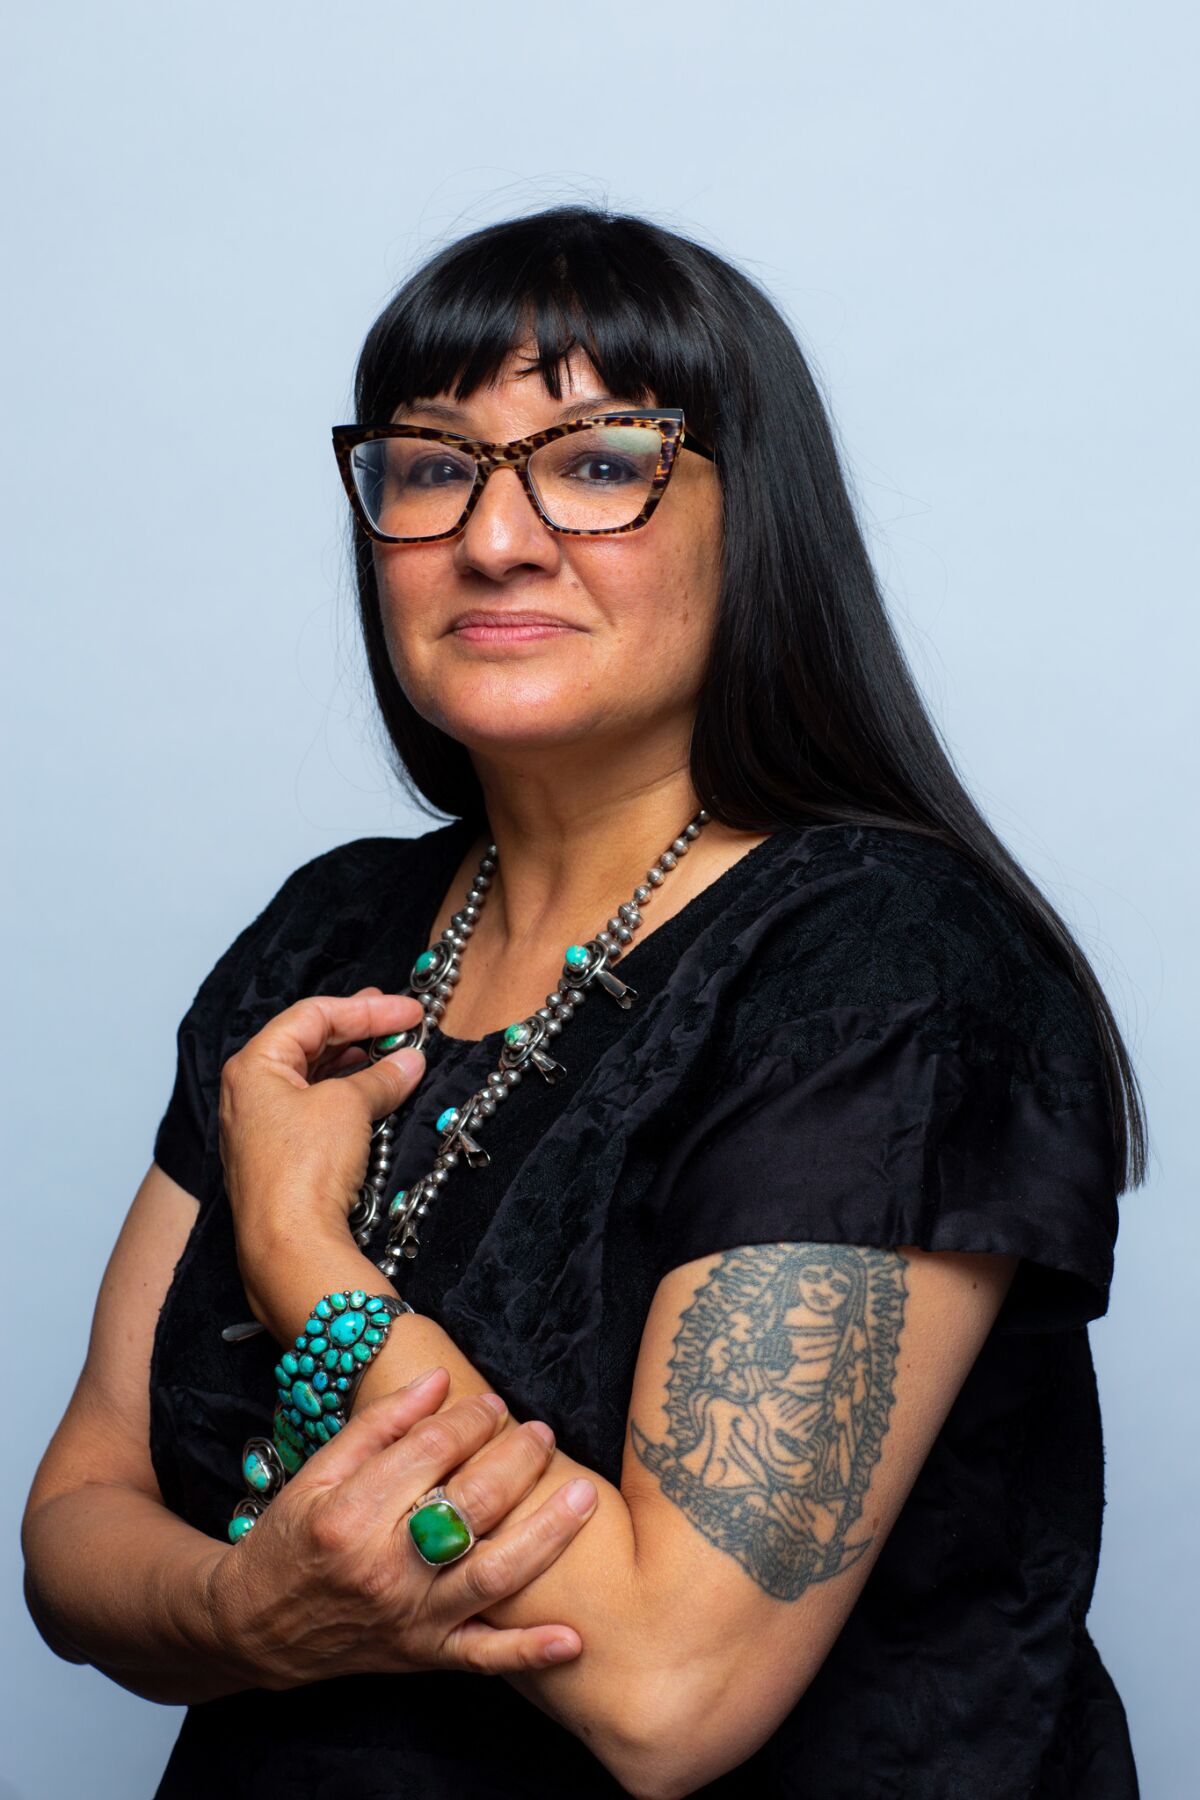 Author Sandra Cisneros praised Jeanine Cummins' "American Dirt" long before a storm of controversy surrounded it.